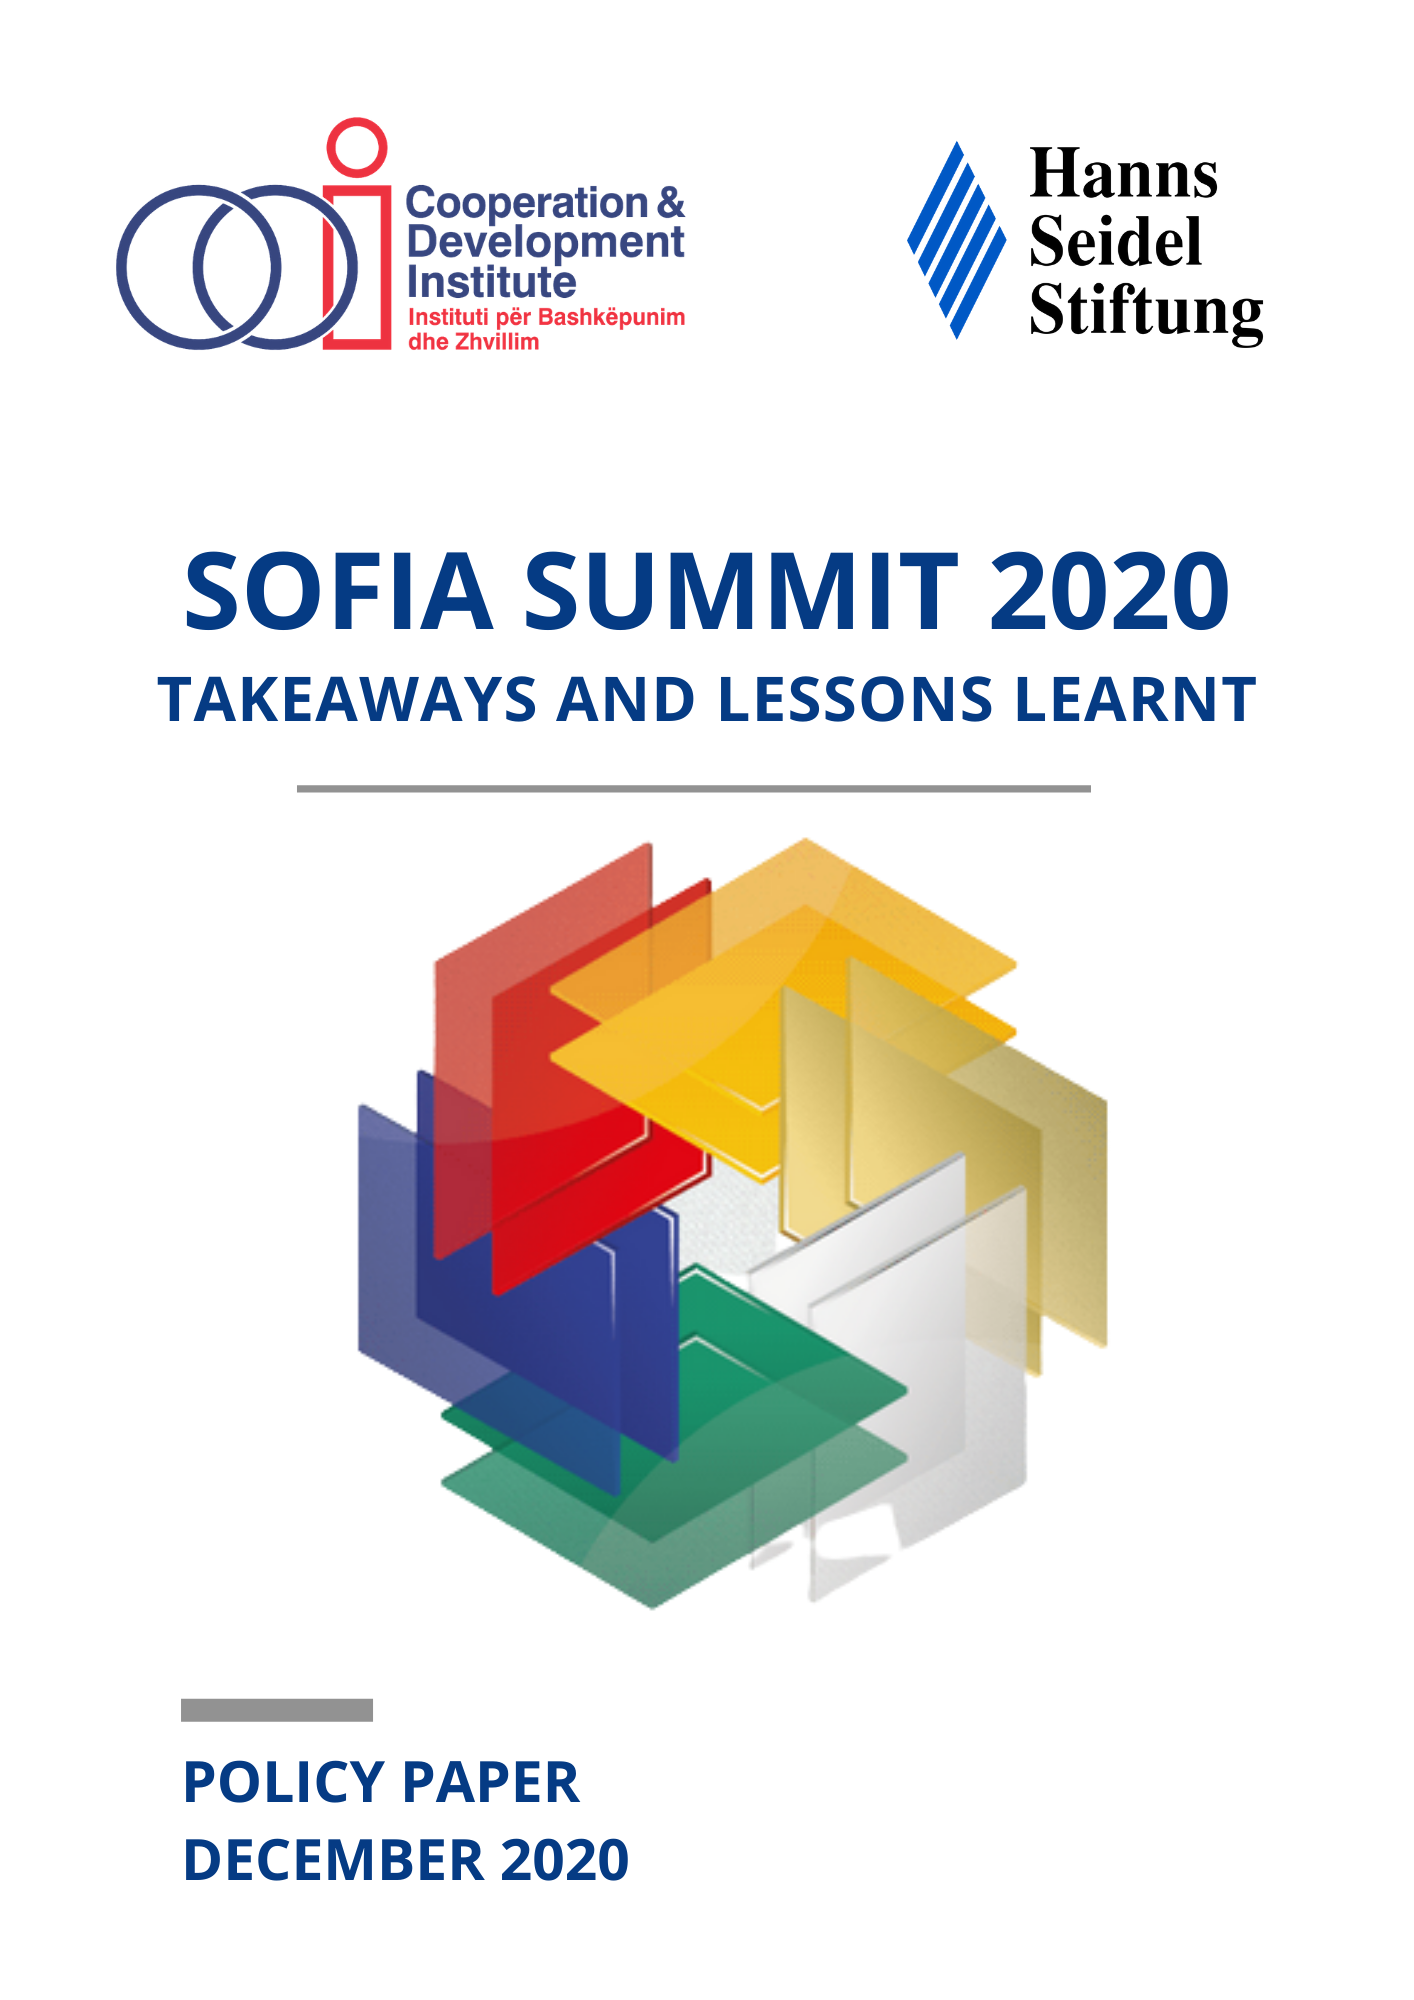 SOFIA SUMMIT 2020 | Takeaways and Lessons Learnt